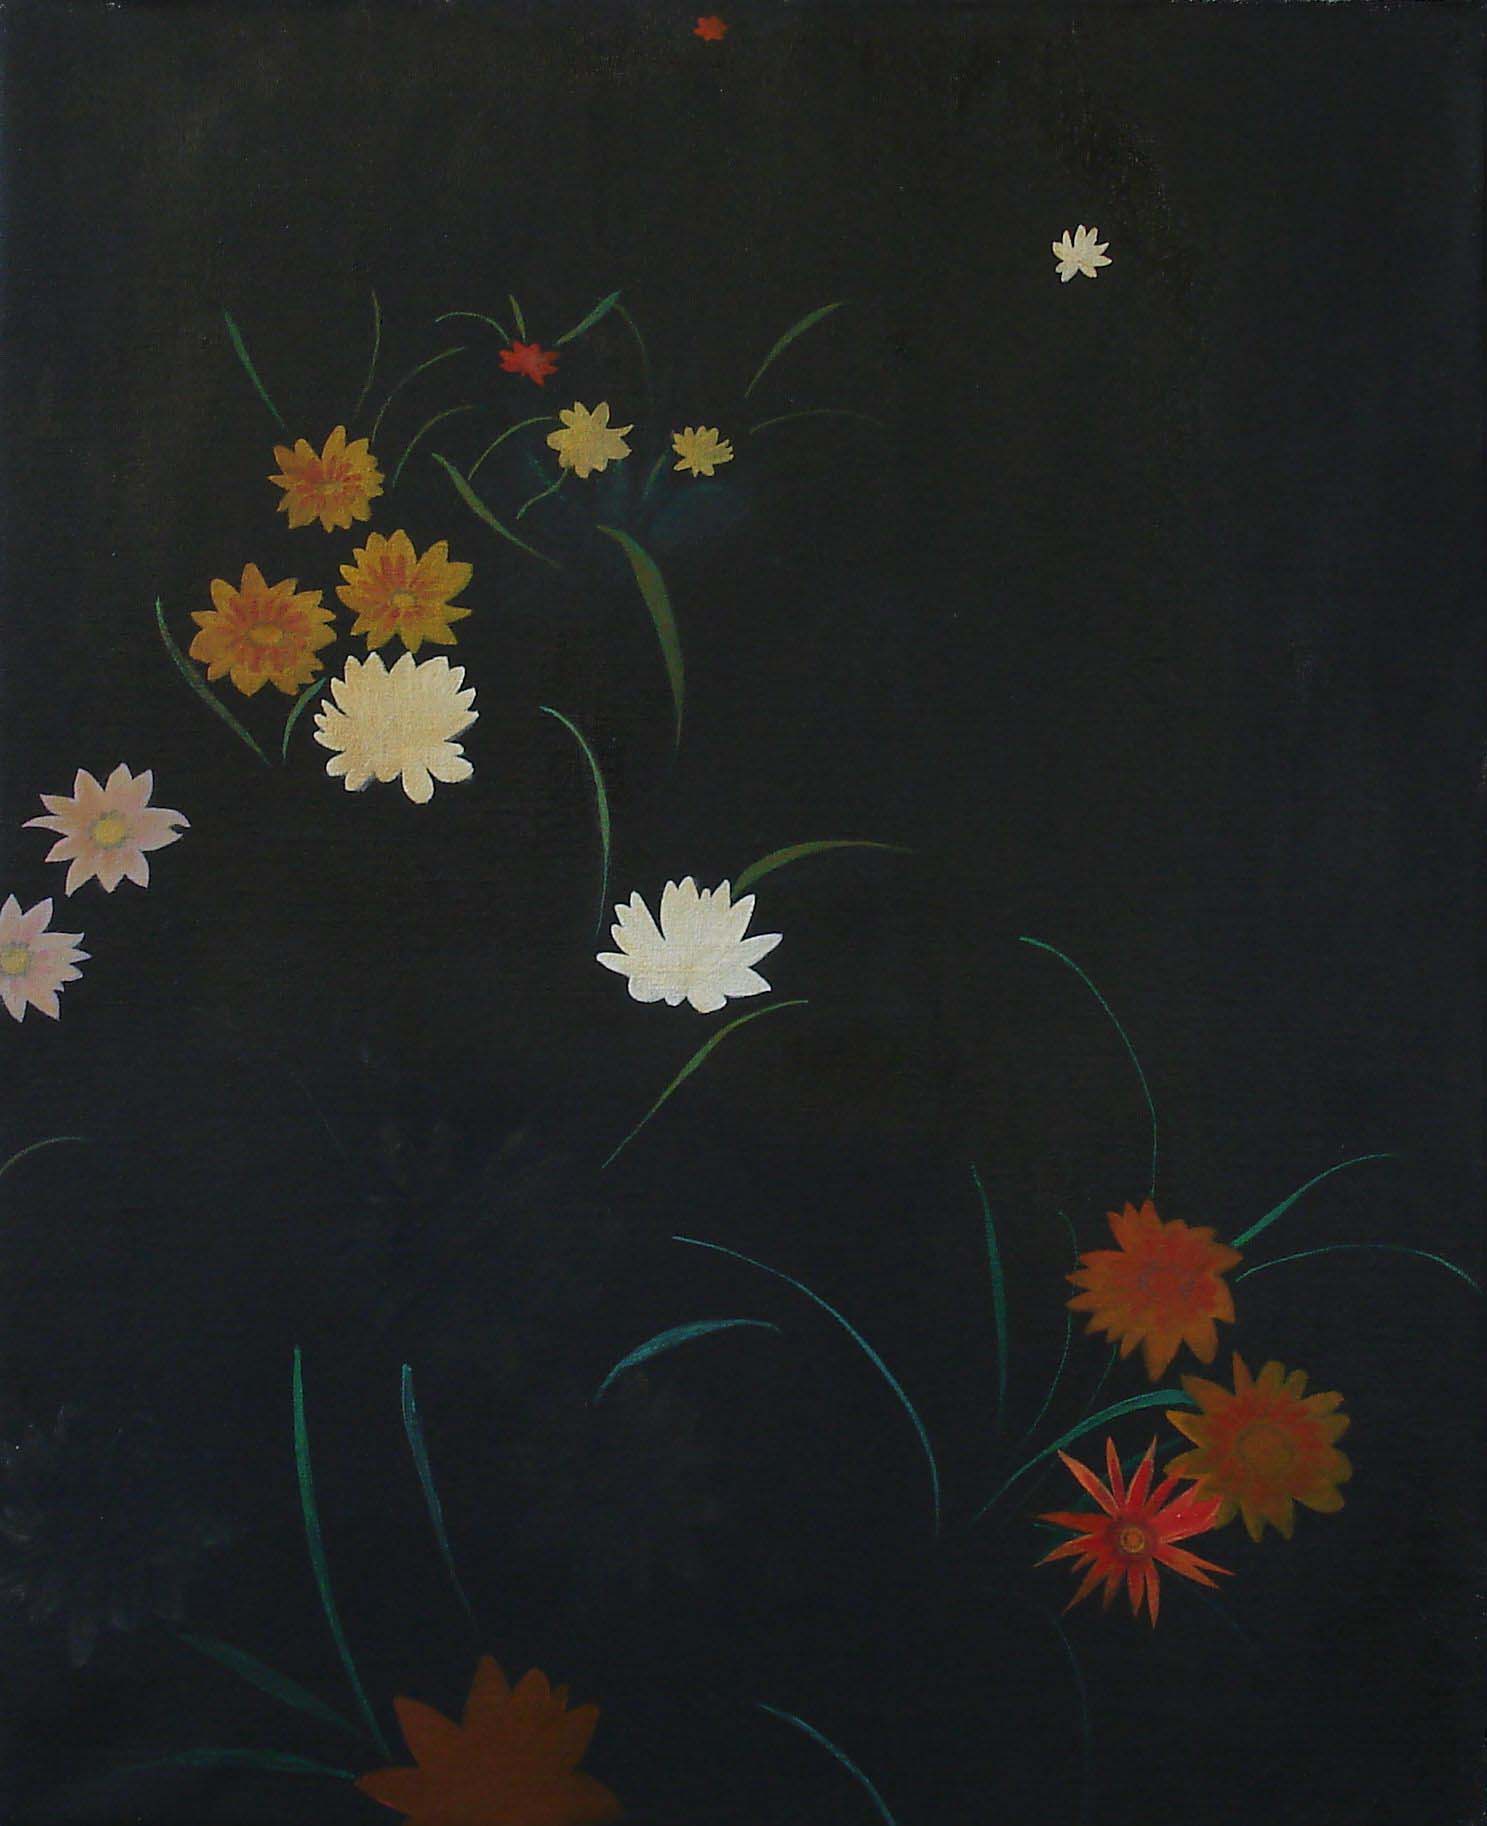   Flowerbed    2005, oil on canvas  